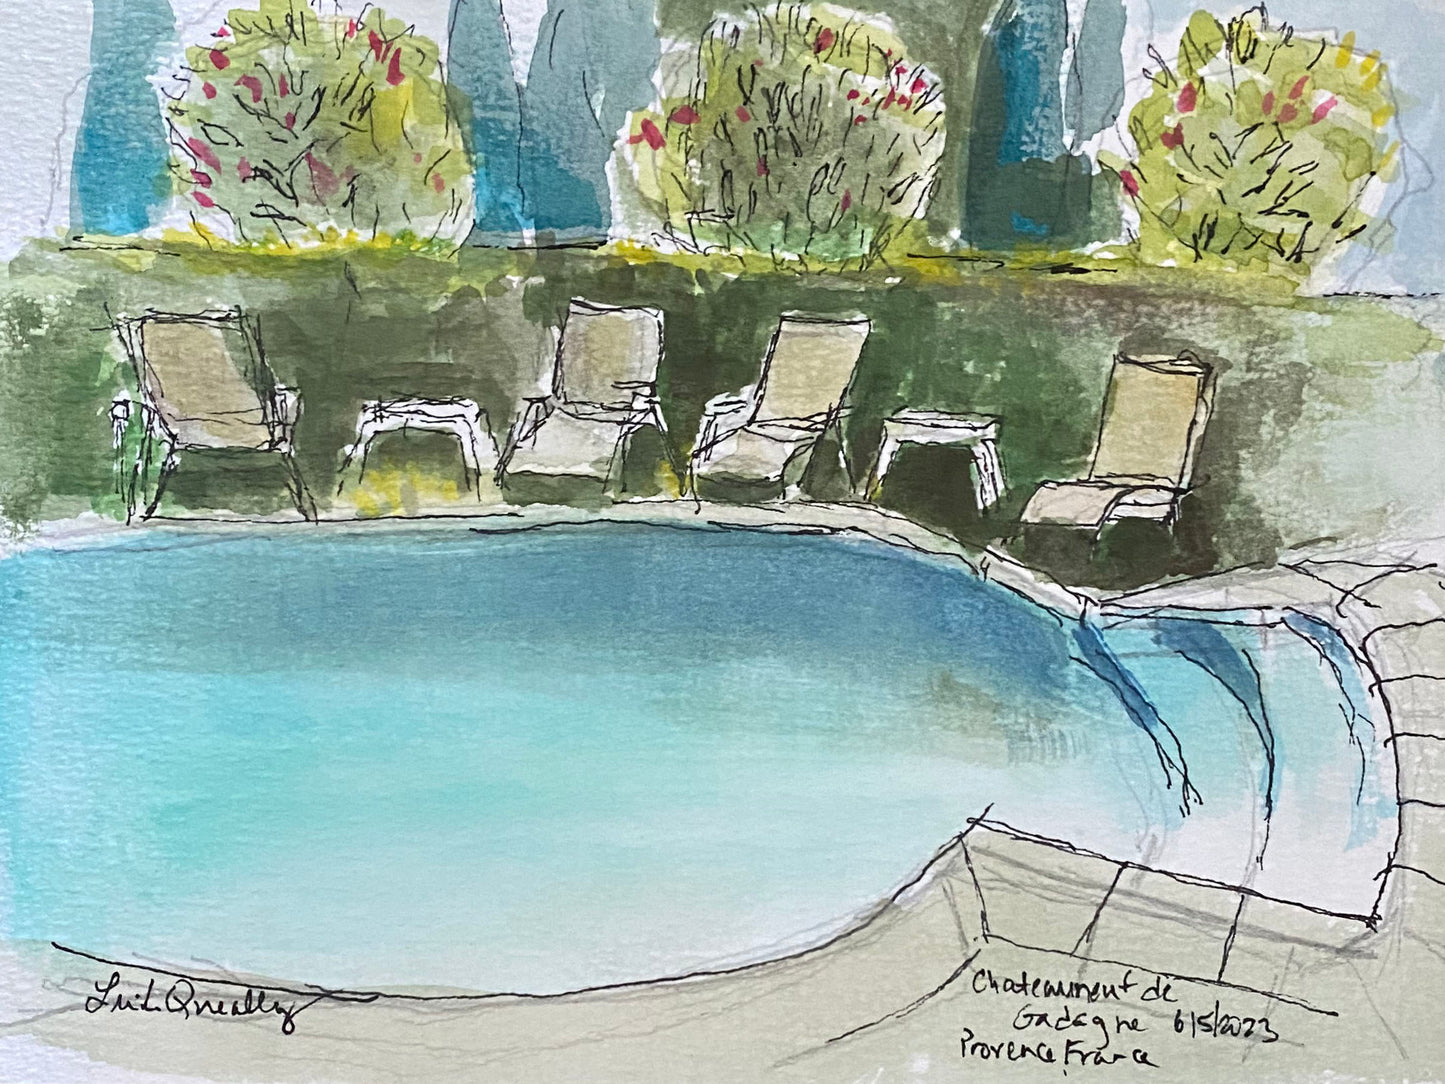 "Chateauneuf-de-Gadagne" Swimming Pool Sketch #4